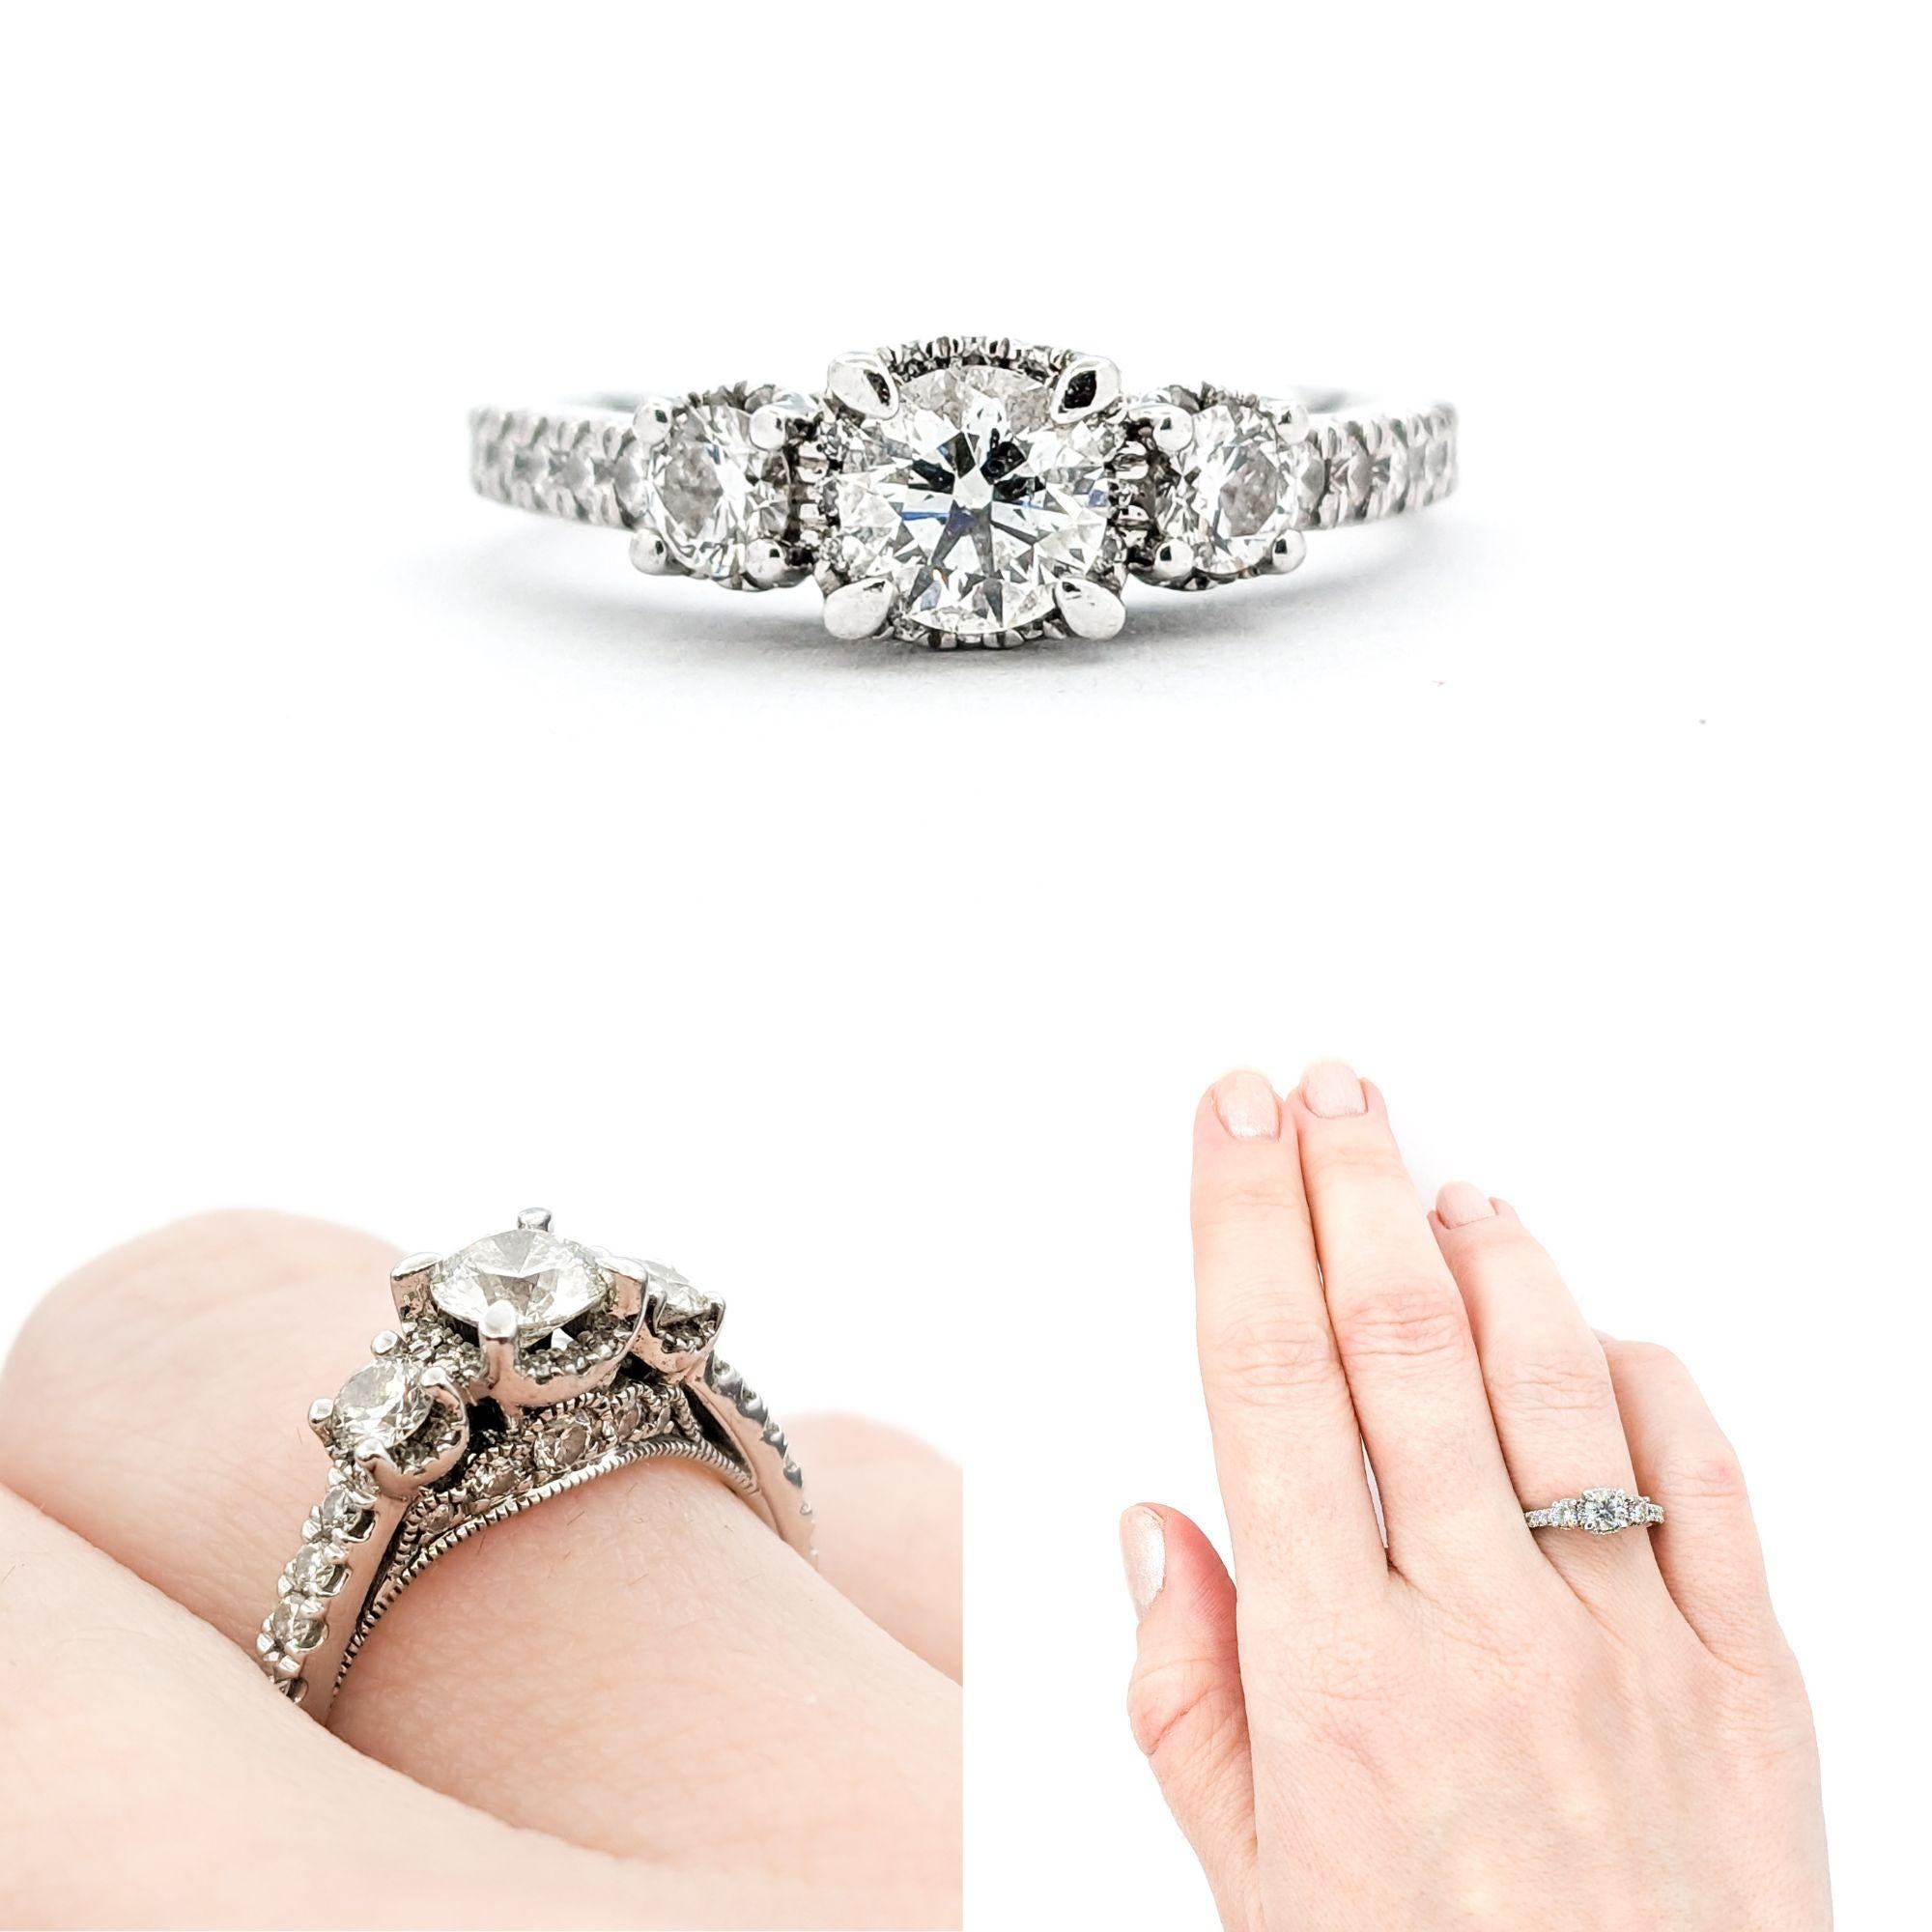 .98ctw Diamond Engagement Ring In White Gold

Presenting an exquisite Diamond Engagement Ring, meticulously crafted in 14kt White Gold, showcasing a stunning collection of diamonds totaling .98ctw. Each diamond has been carefully selected for its I